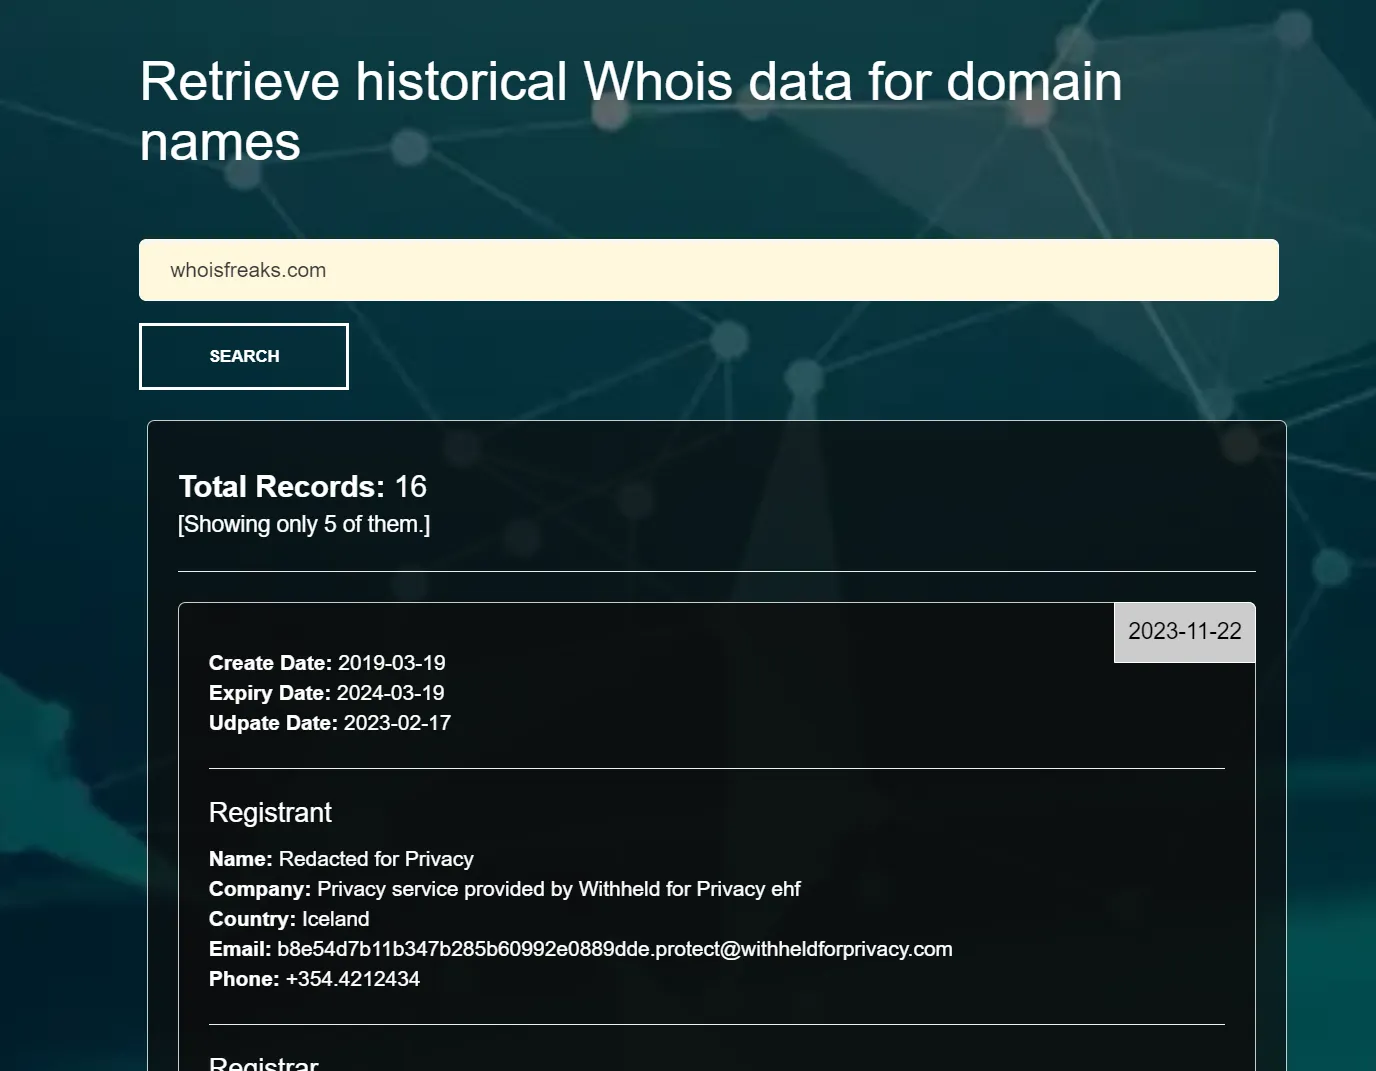 Historical Whois data is just seconds away and accessible from any web browser